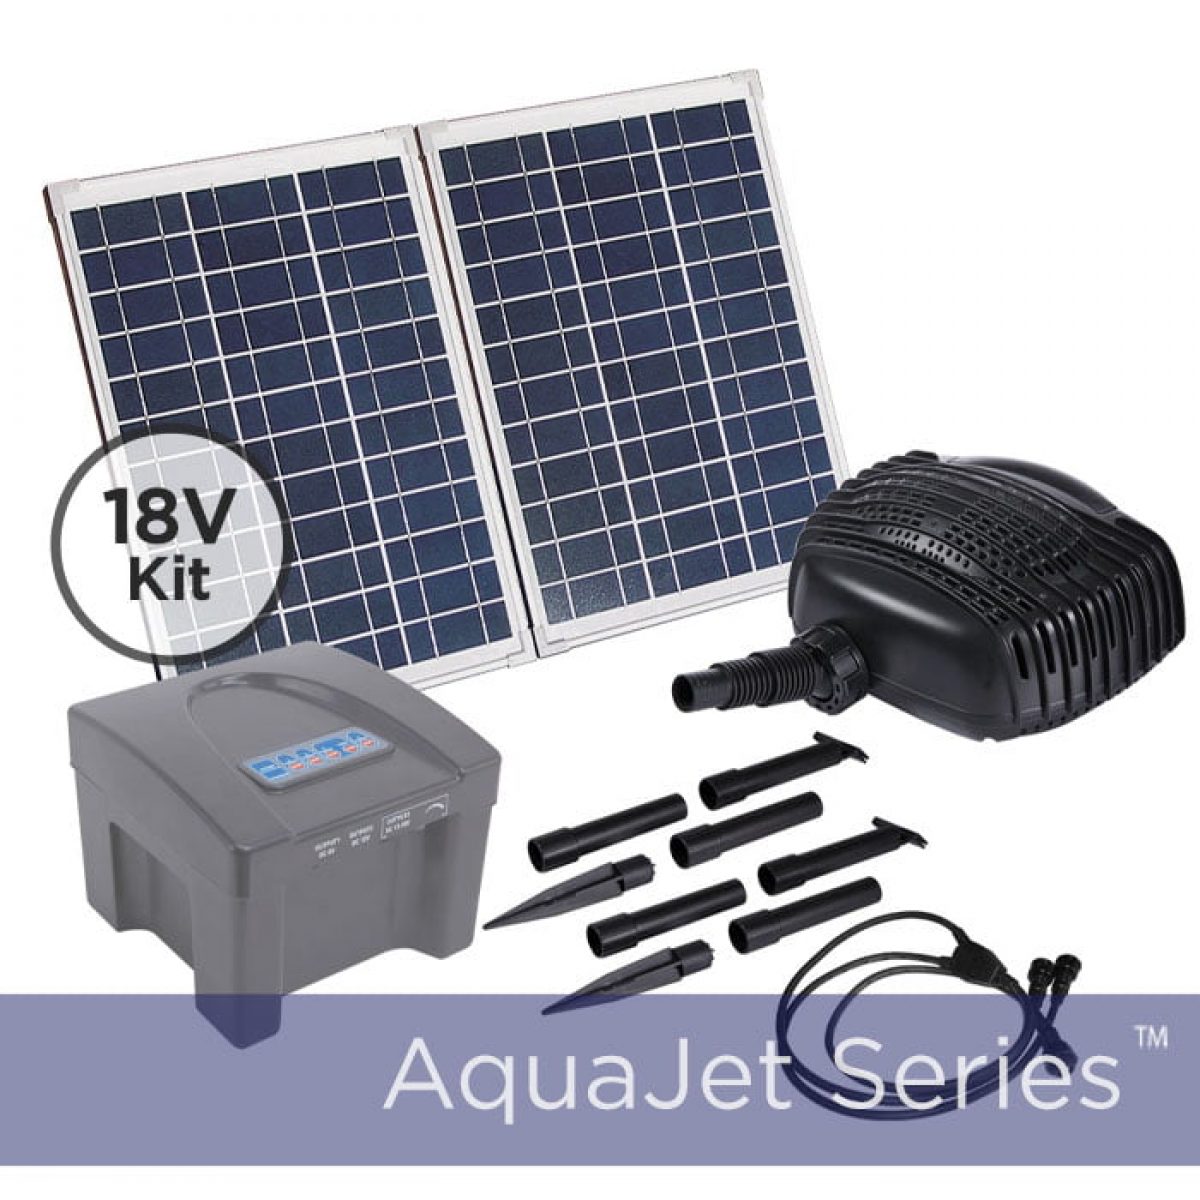 Battery Backup & LED Lights Solar Powered Water Garden Pond Feature Pump 79GPH 